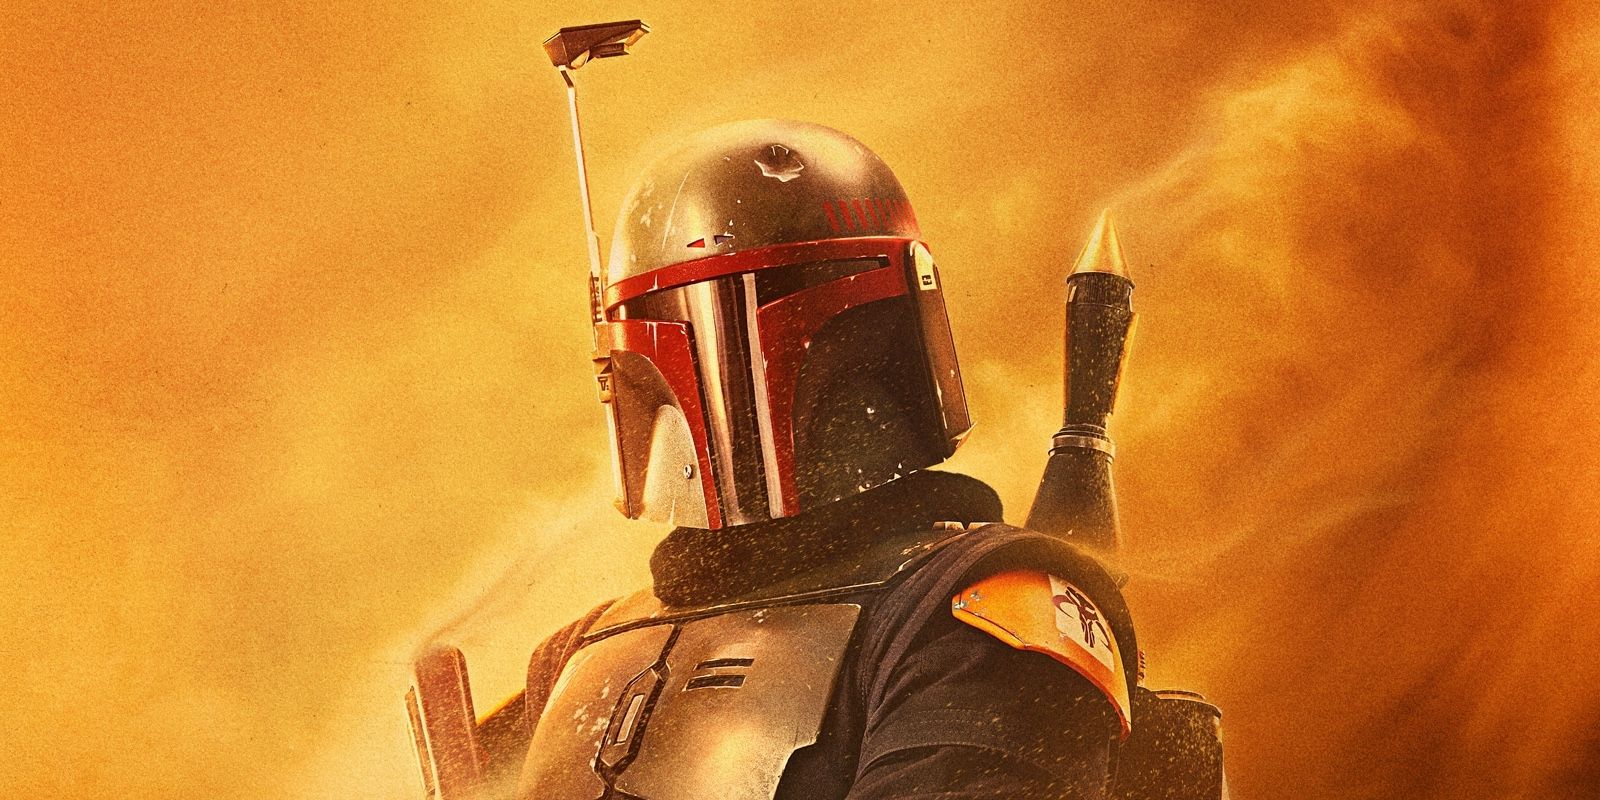 Boba Fett, played by Temuera Morrison, in The Book of Boba Fett